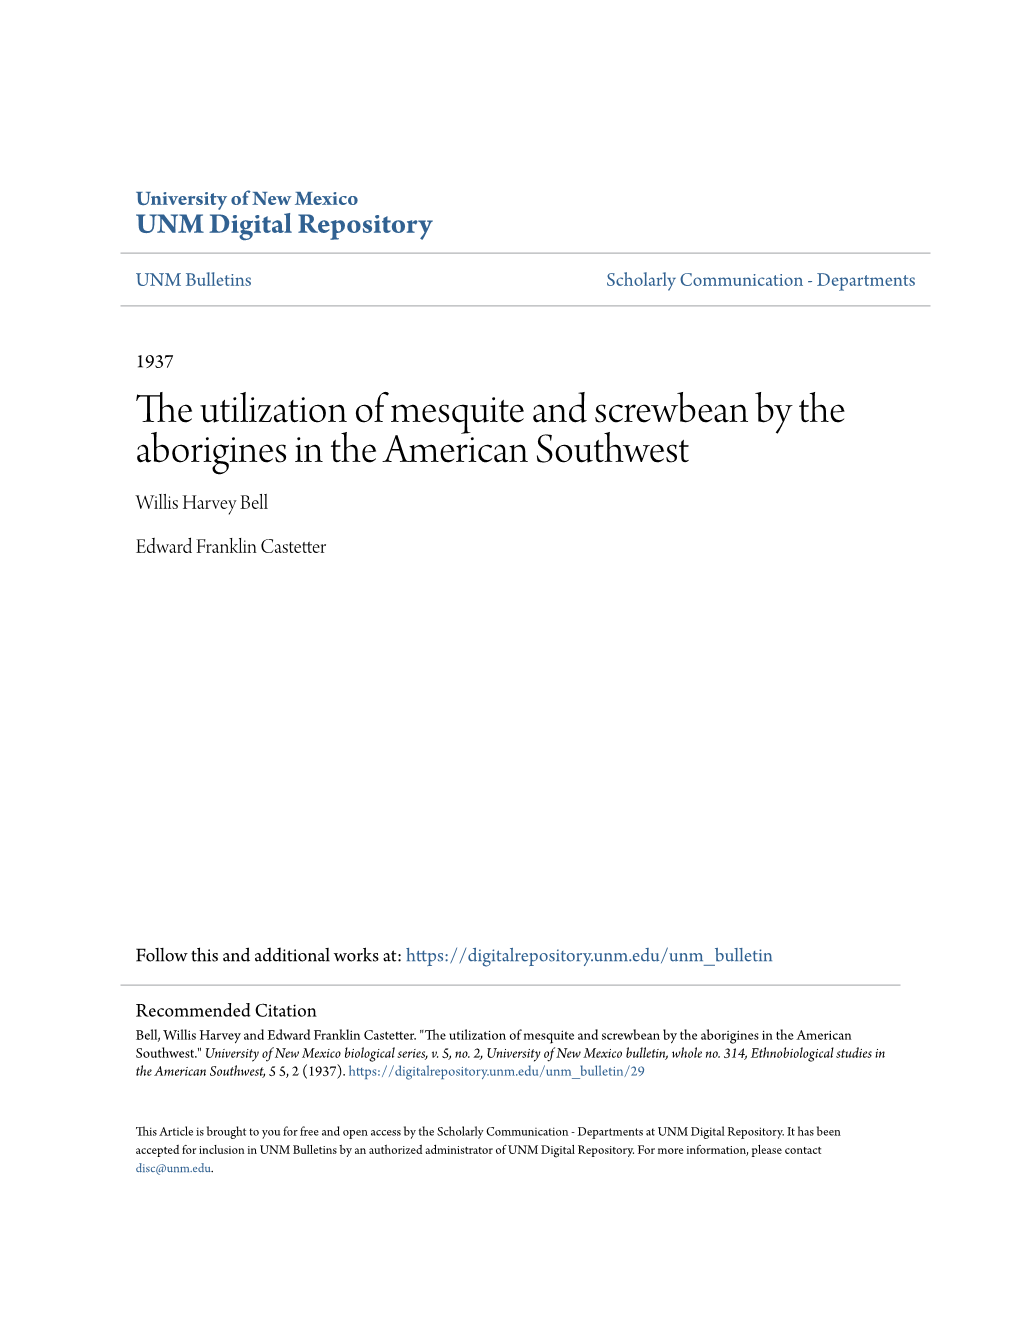 The Utilization of Mesquite and Screwbean by the Aborigines in the American Southwest Willis Harvey Bell